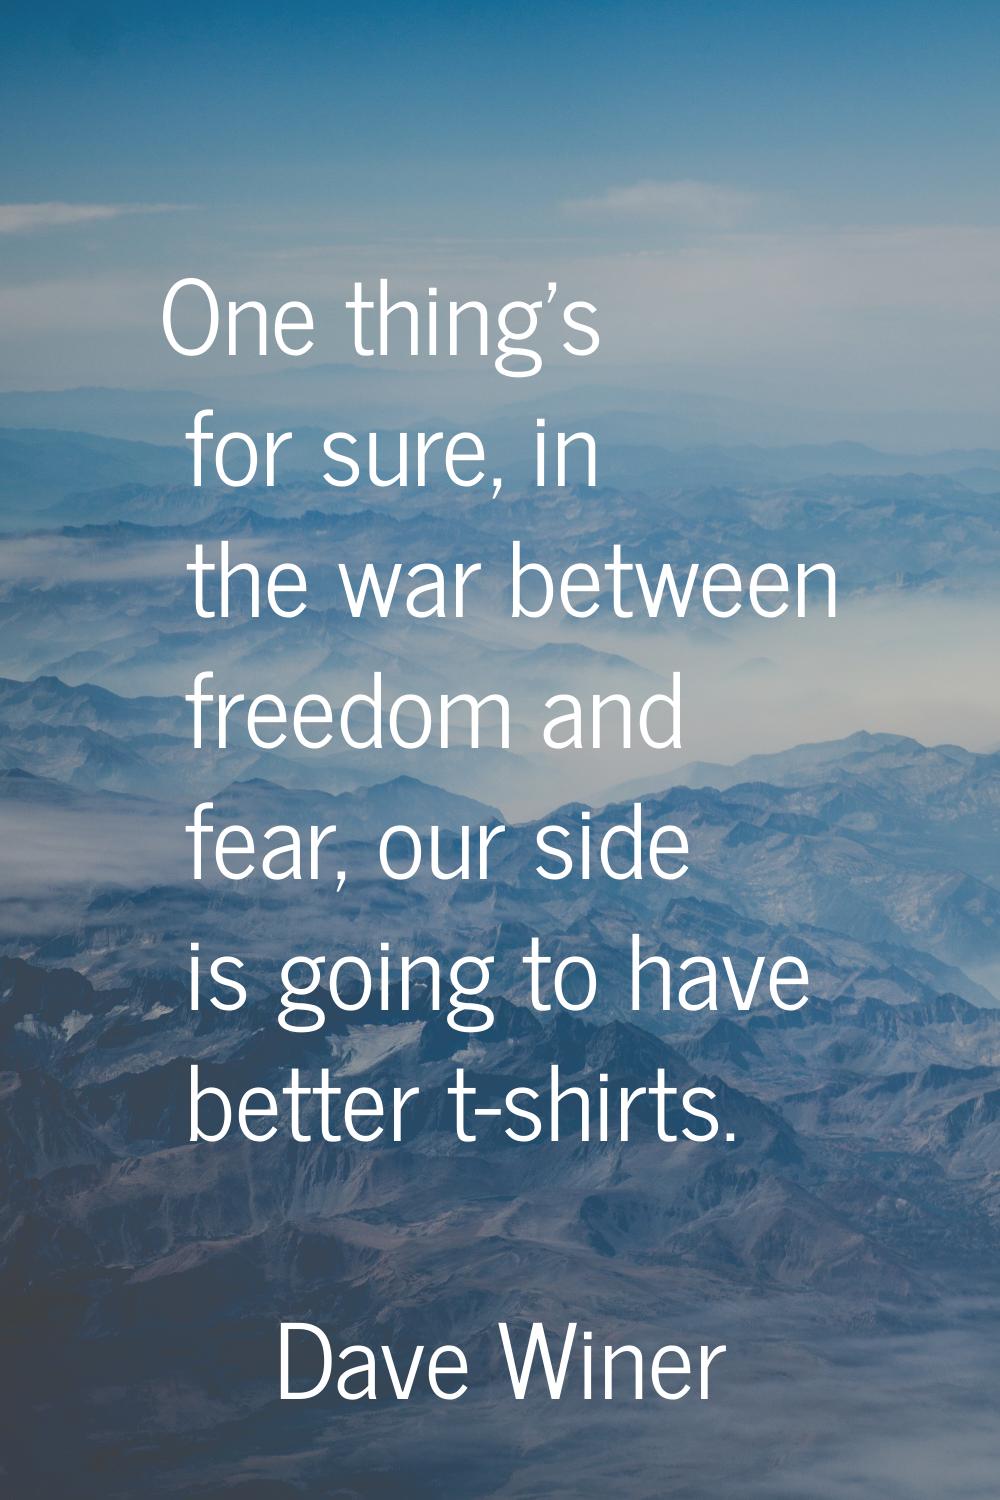 One thing's for sure, in the war between freedom and fear, our side is going to have better t-shirt